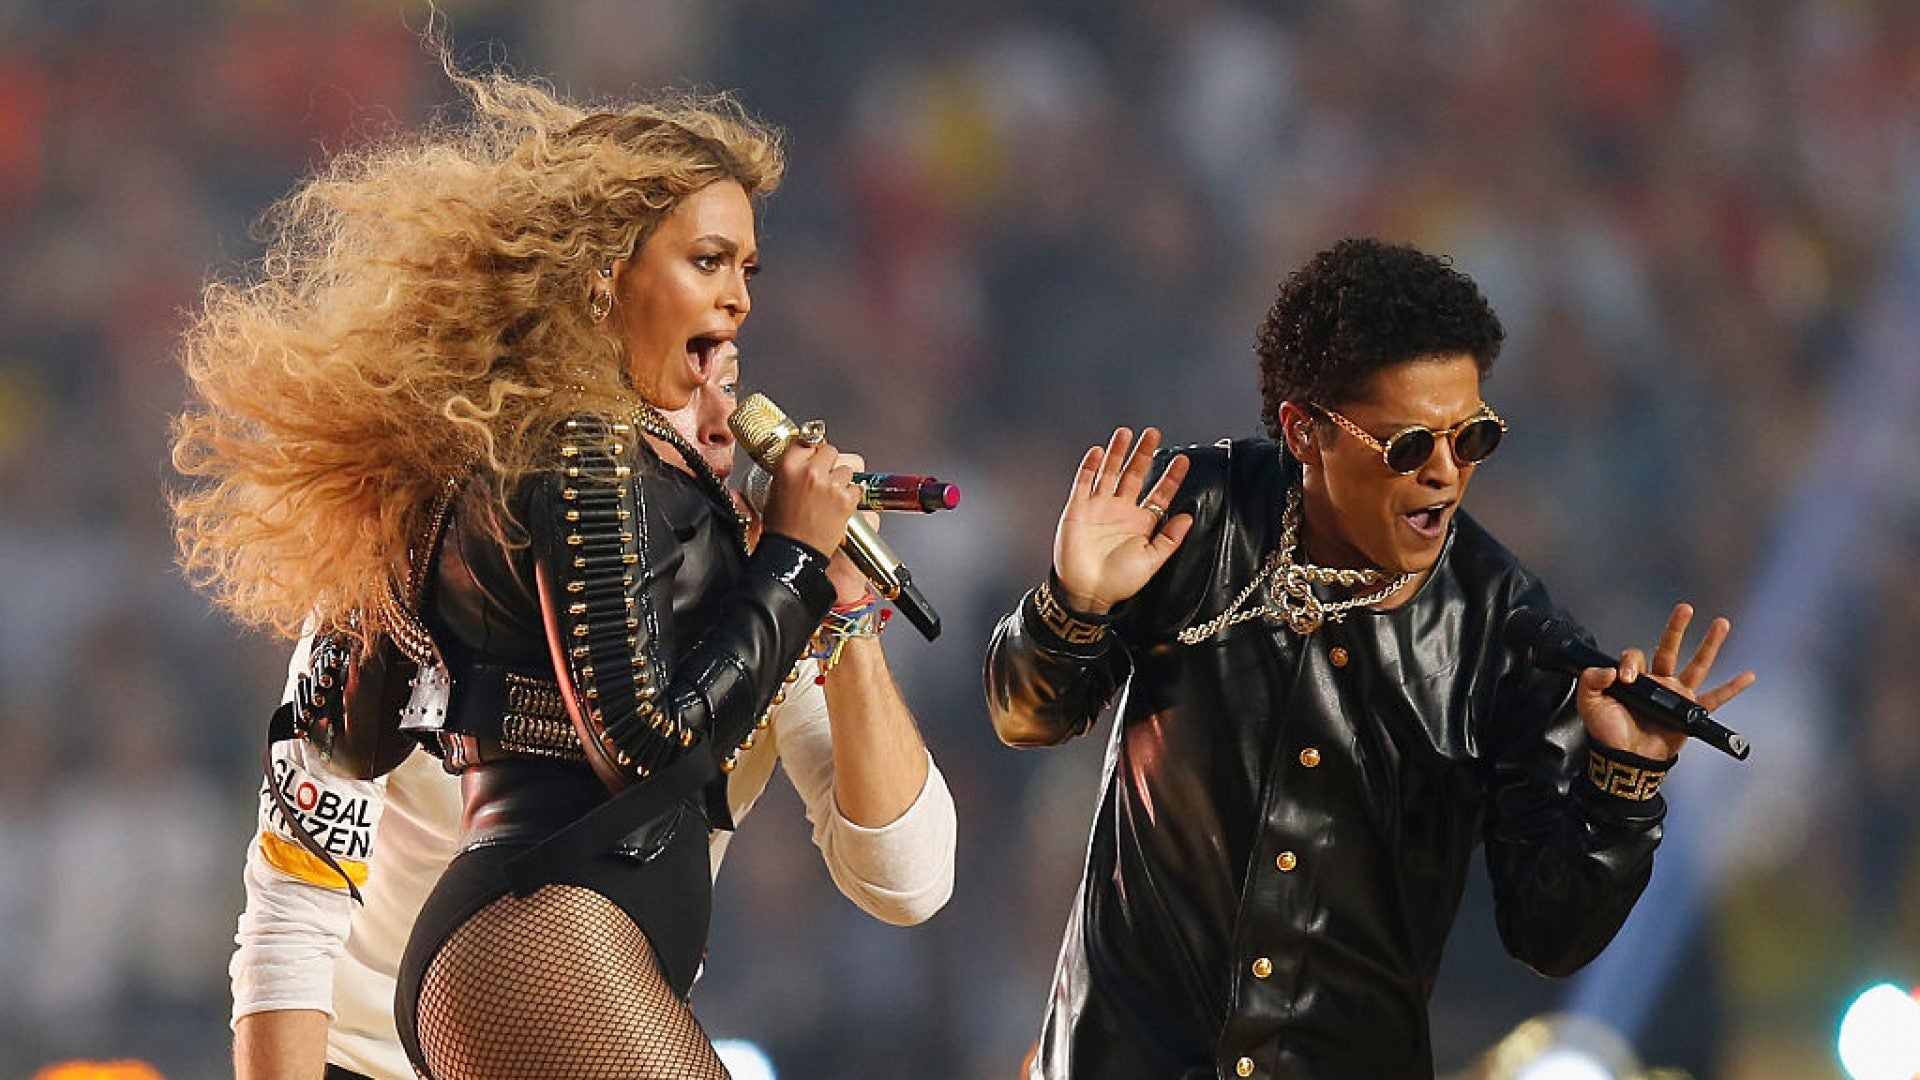 7 of The Best Black Super Bowl Performances of All Time